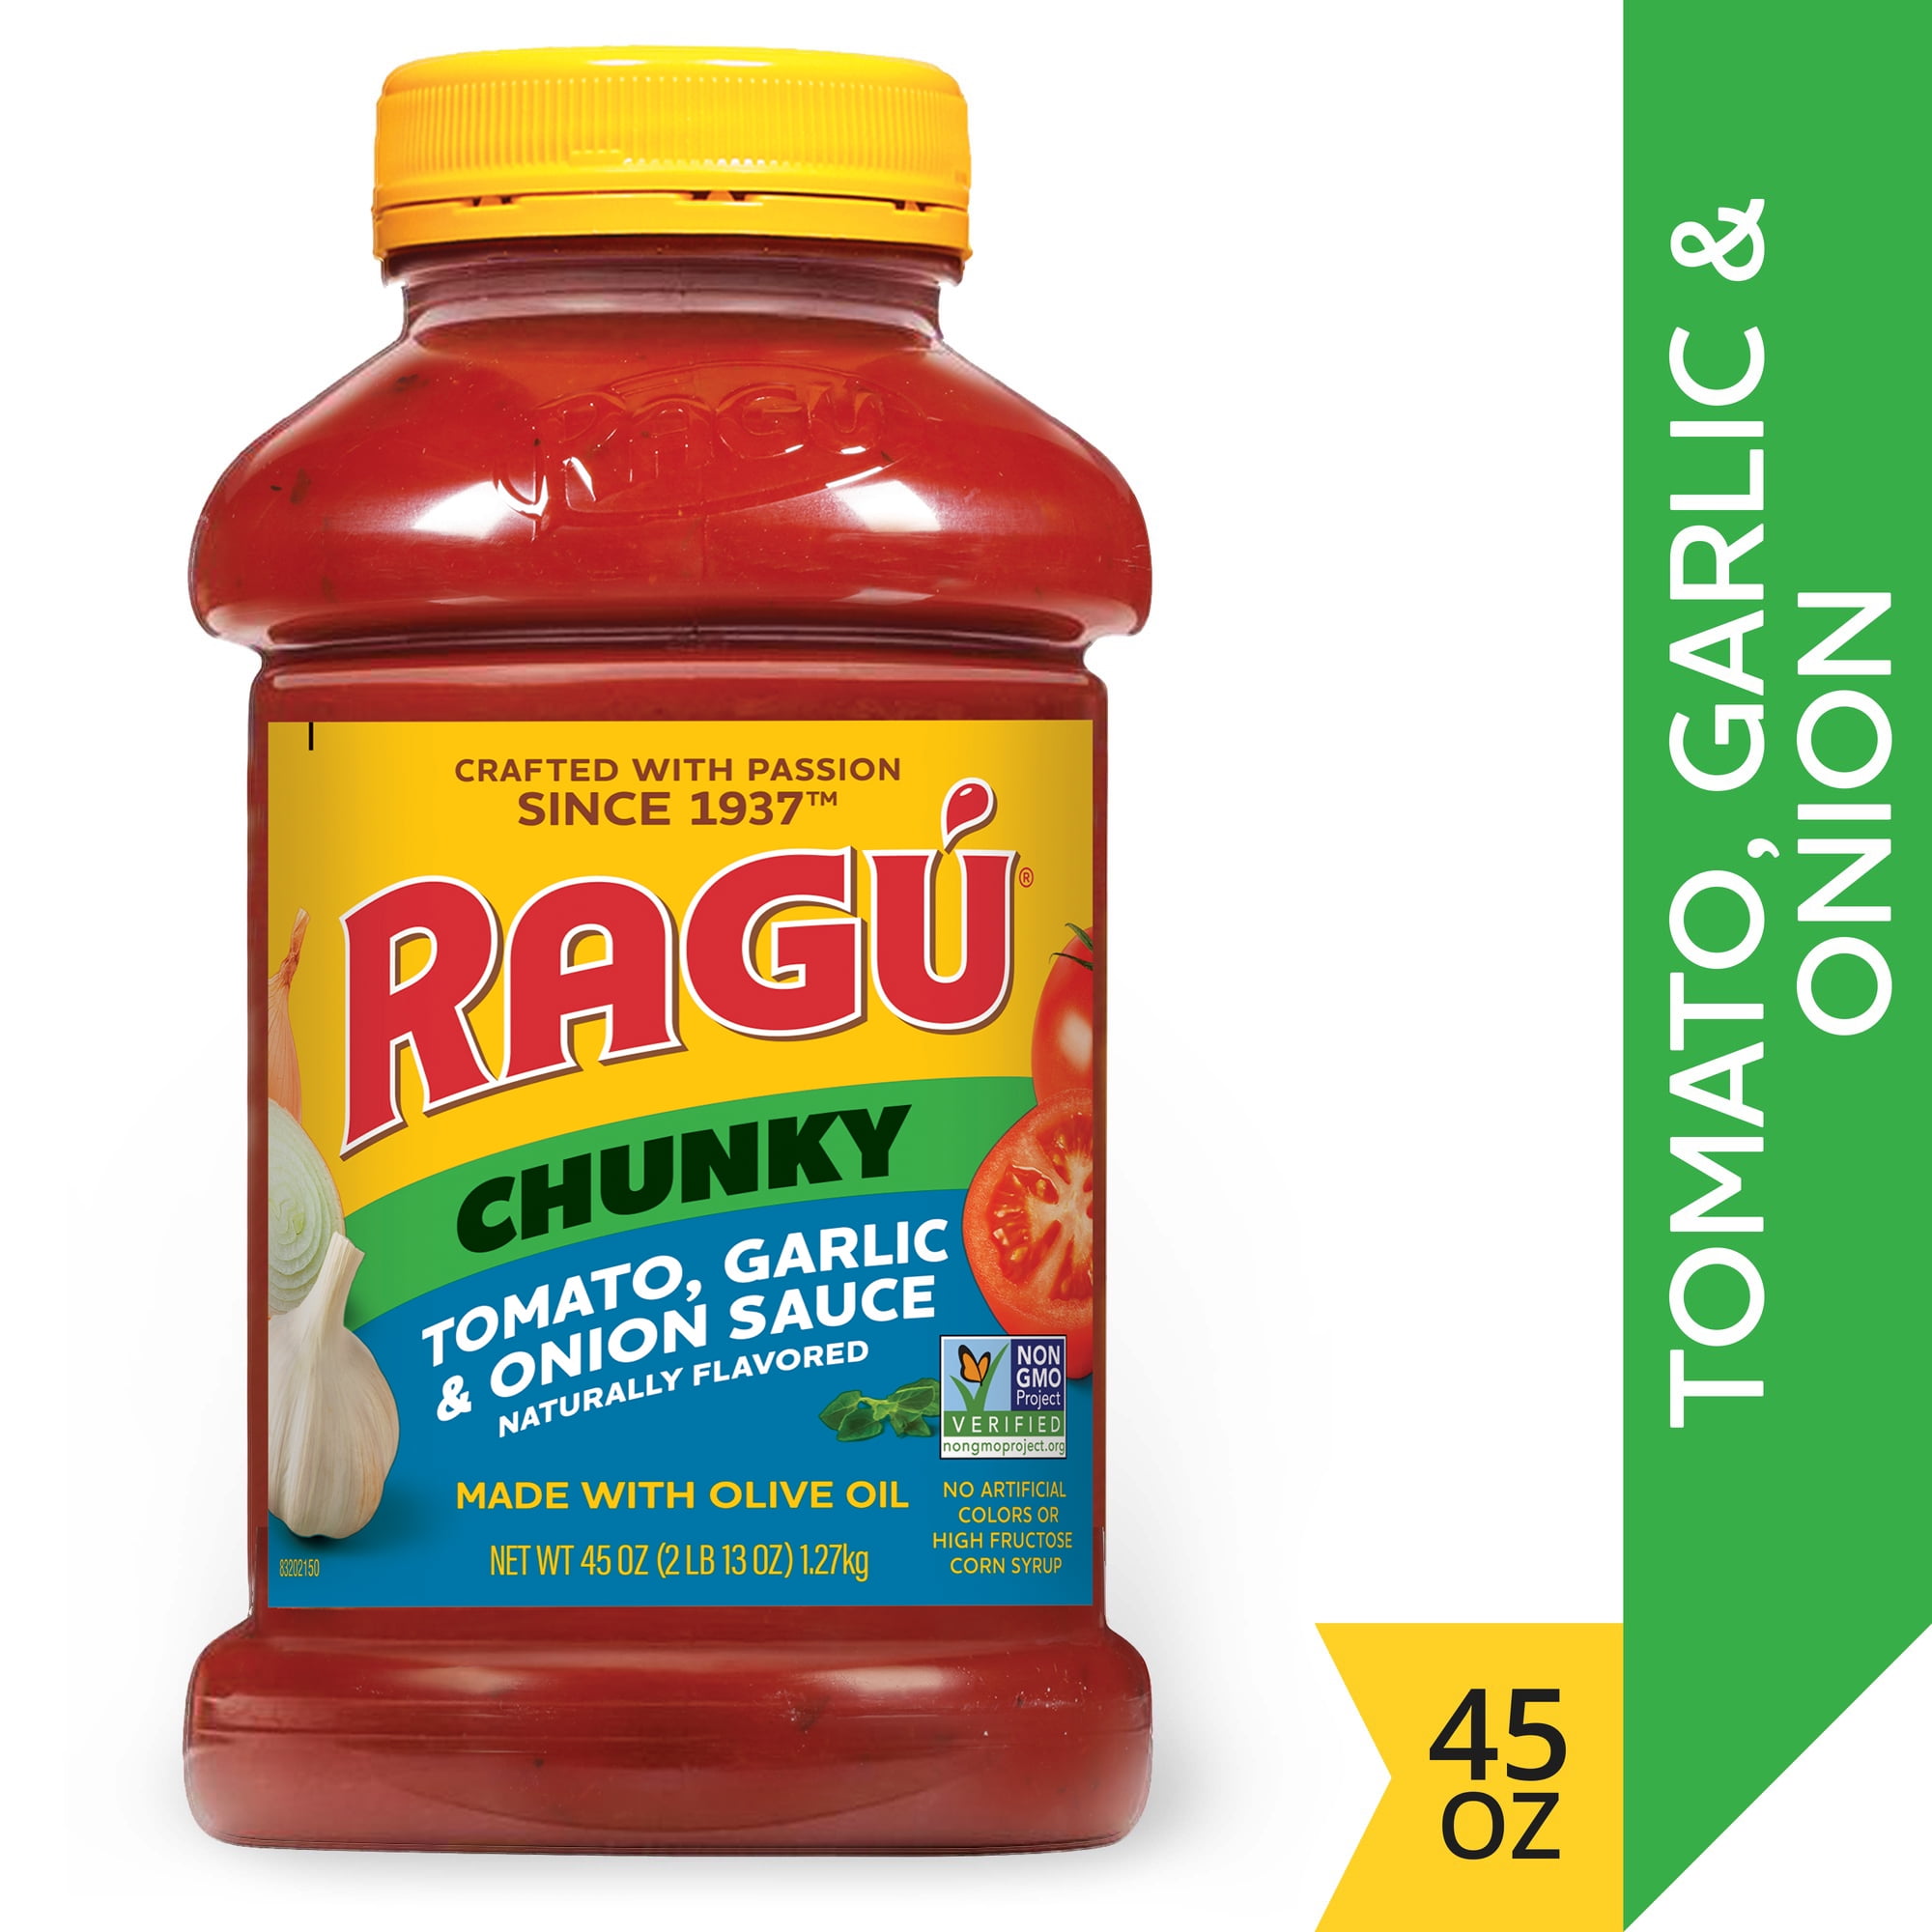 Ragu Chunky Tomato, Garlic and Onion Pasta Sauce, Made with Olive Oil, Diced Tomatoes, Delicious Garlic and Onions, and Italian Herbs and Spices, 45 OZ